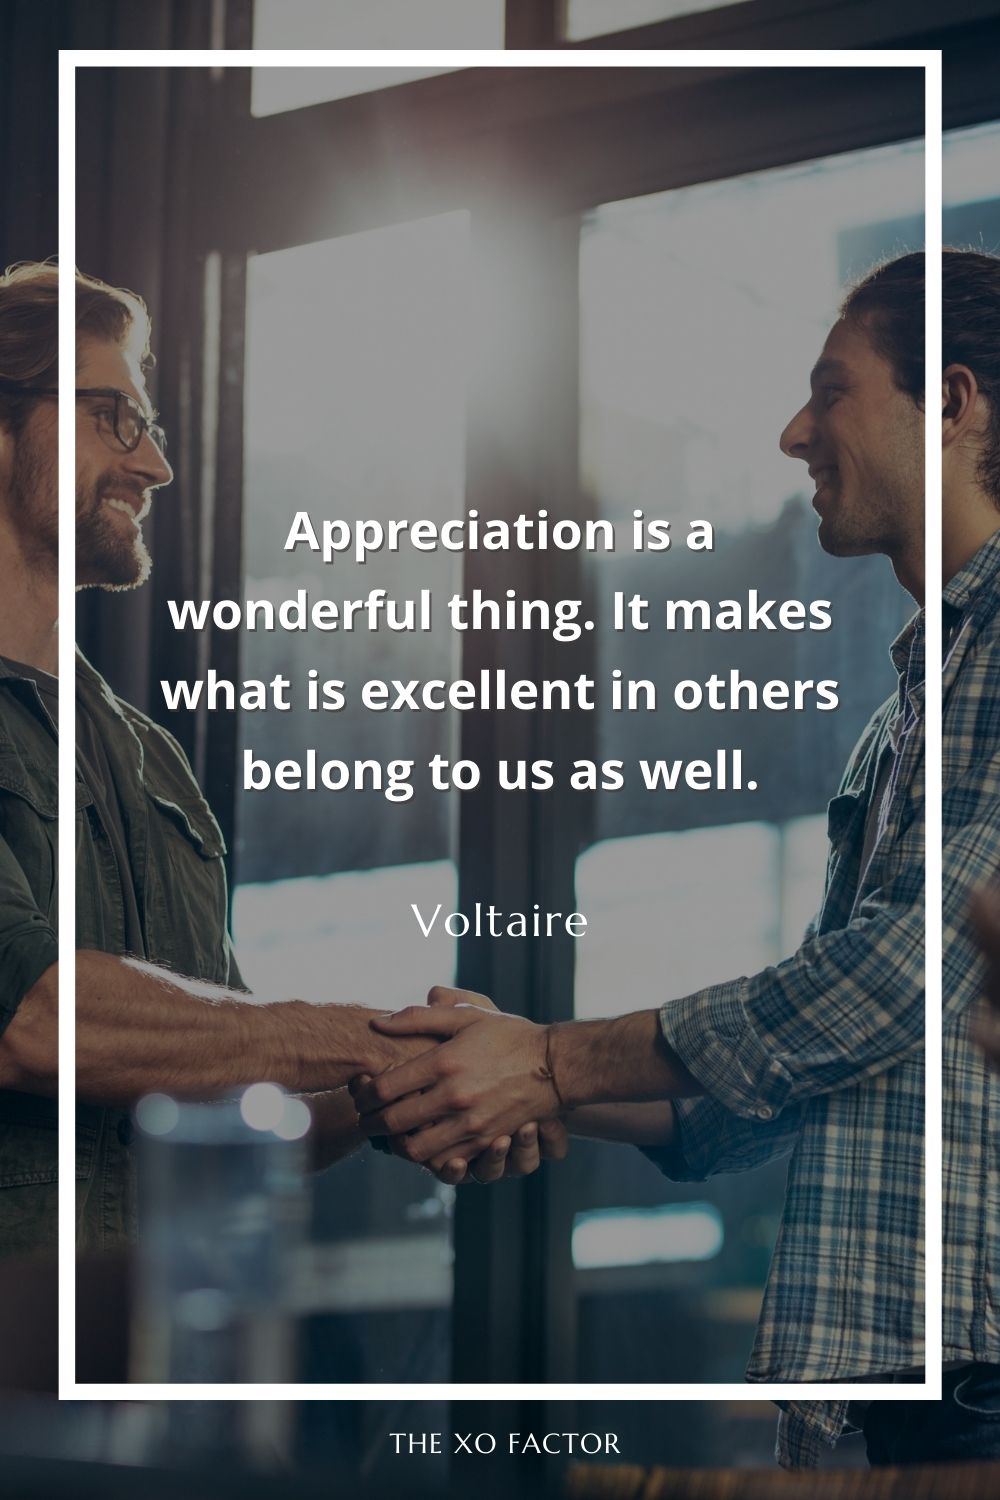 Appreciation is a wonderful thing. It makes what is excellent in others belong to us as well.